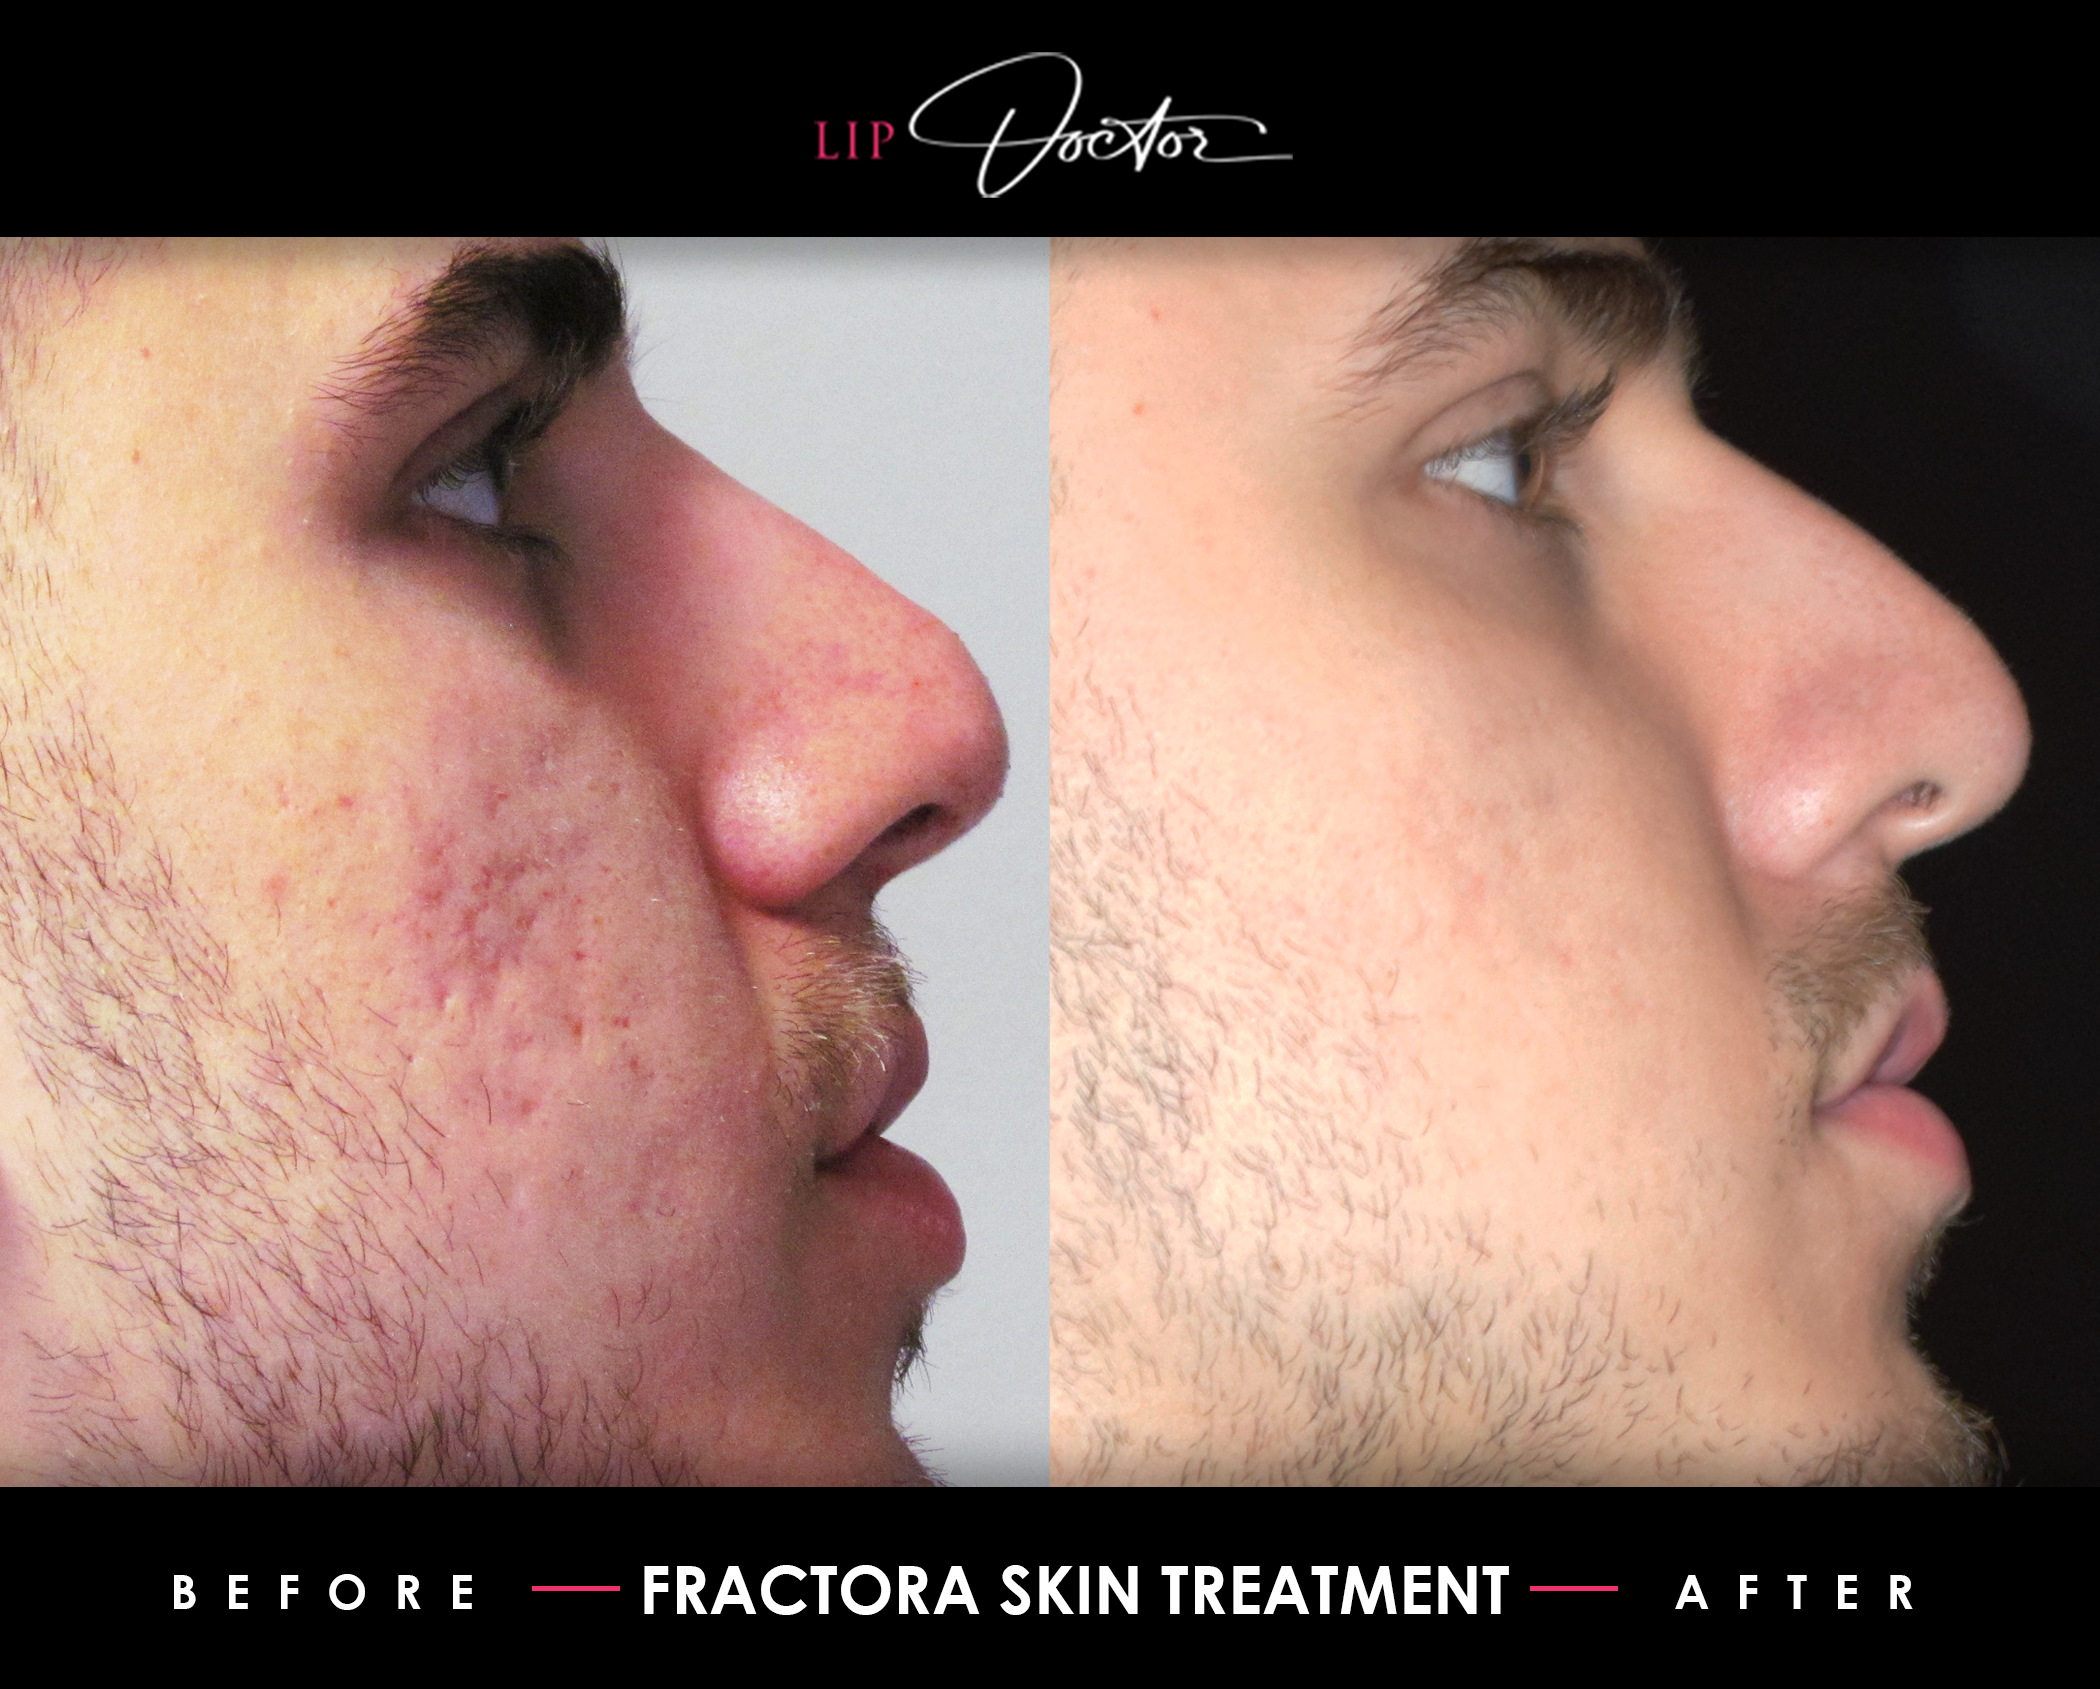 Second set of before and after photos illustrating the transformative effects of Fractora treatment at Lip Doctor. The 'Before' photo reveals deep acne scars and a rough skin surface, while the 'After' photo demonstrates a remarkable transition to a smoother, more even, and revitalized complexion, emphasizing Fractora's powerful impact on skin restoration.